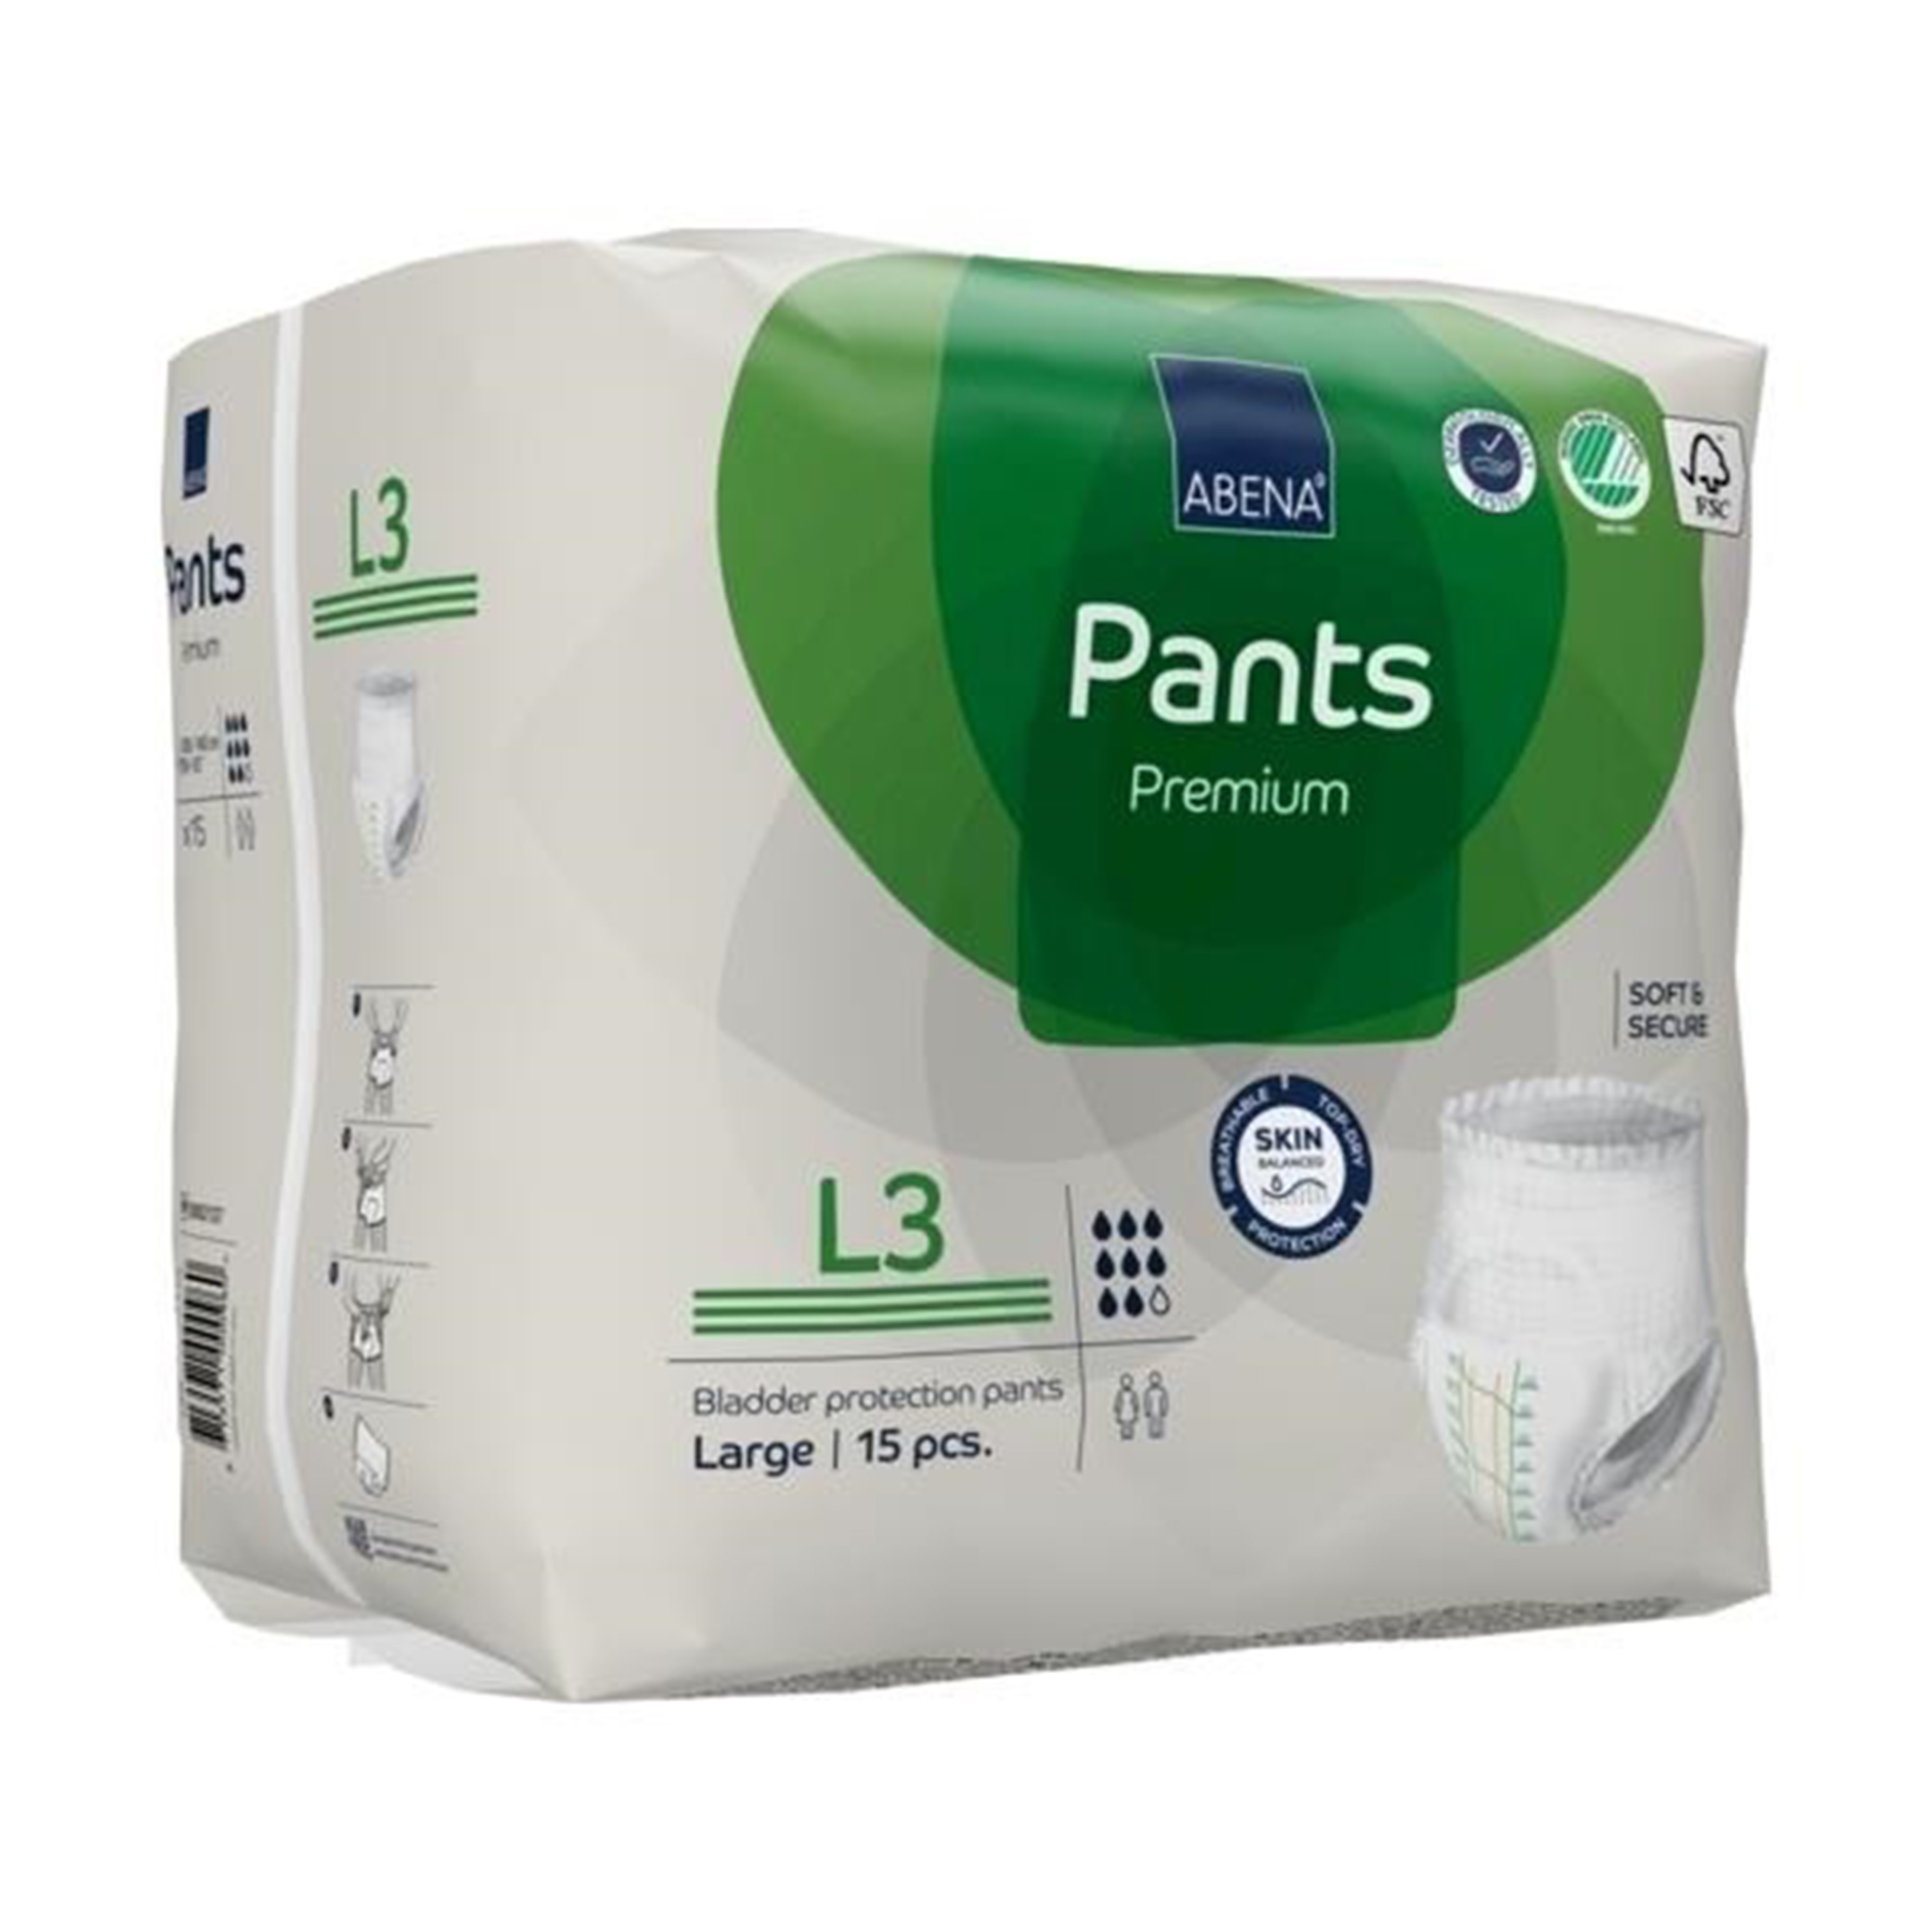 Abena Premium Pants L3 Disposable Underwear Pull On with Tear Away Seams Large, 1000021327, 90 Ct - image 3 of 7